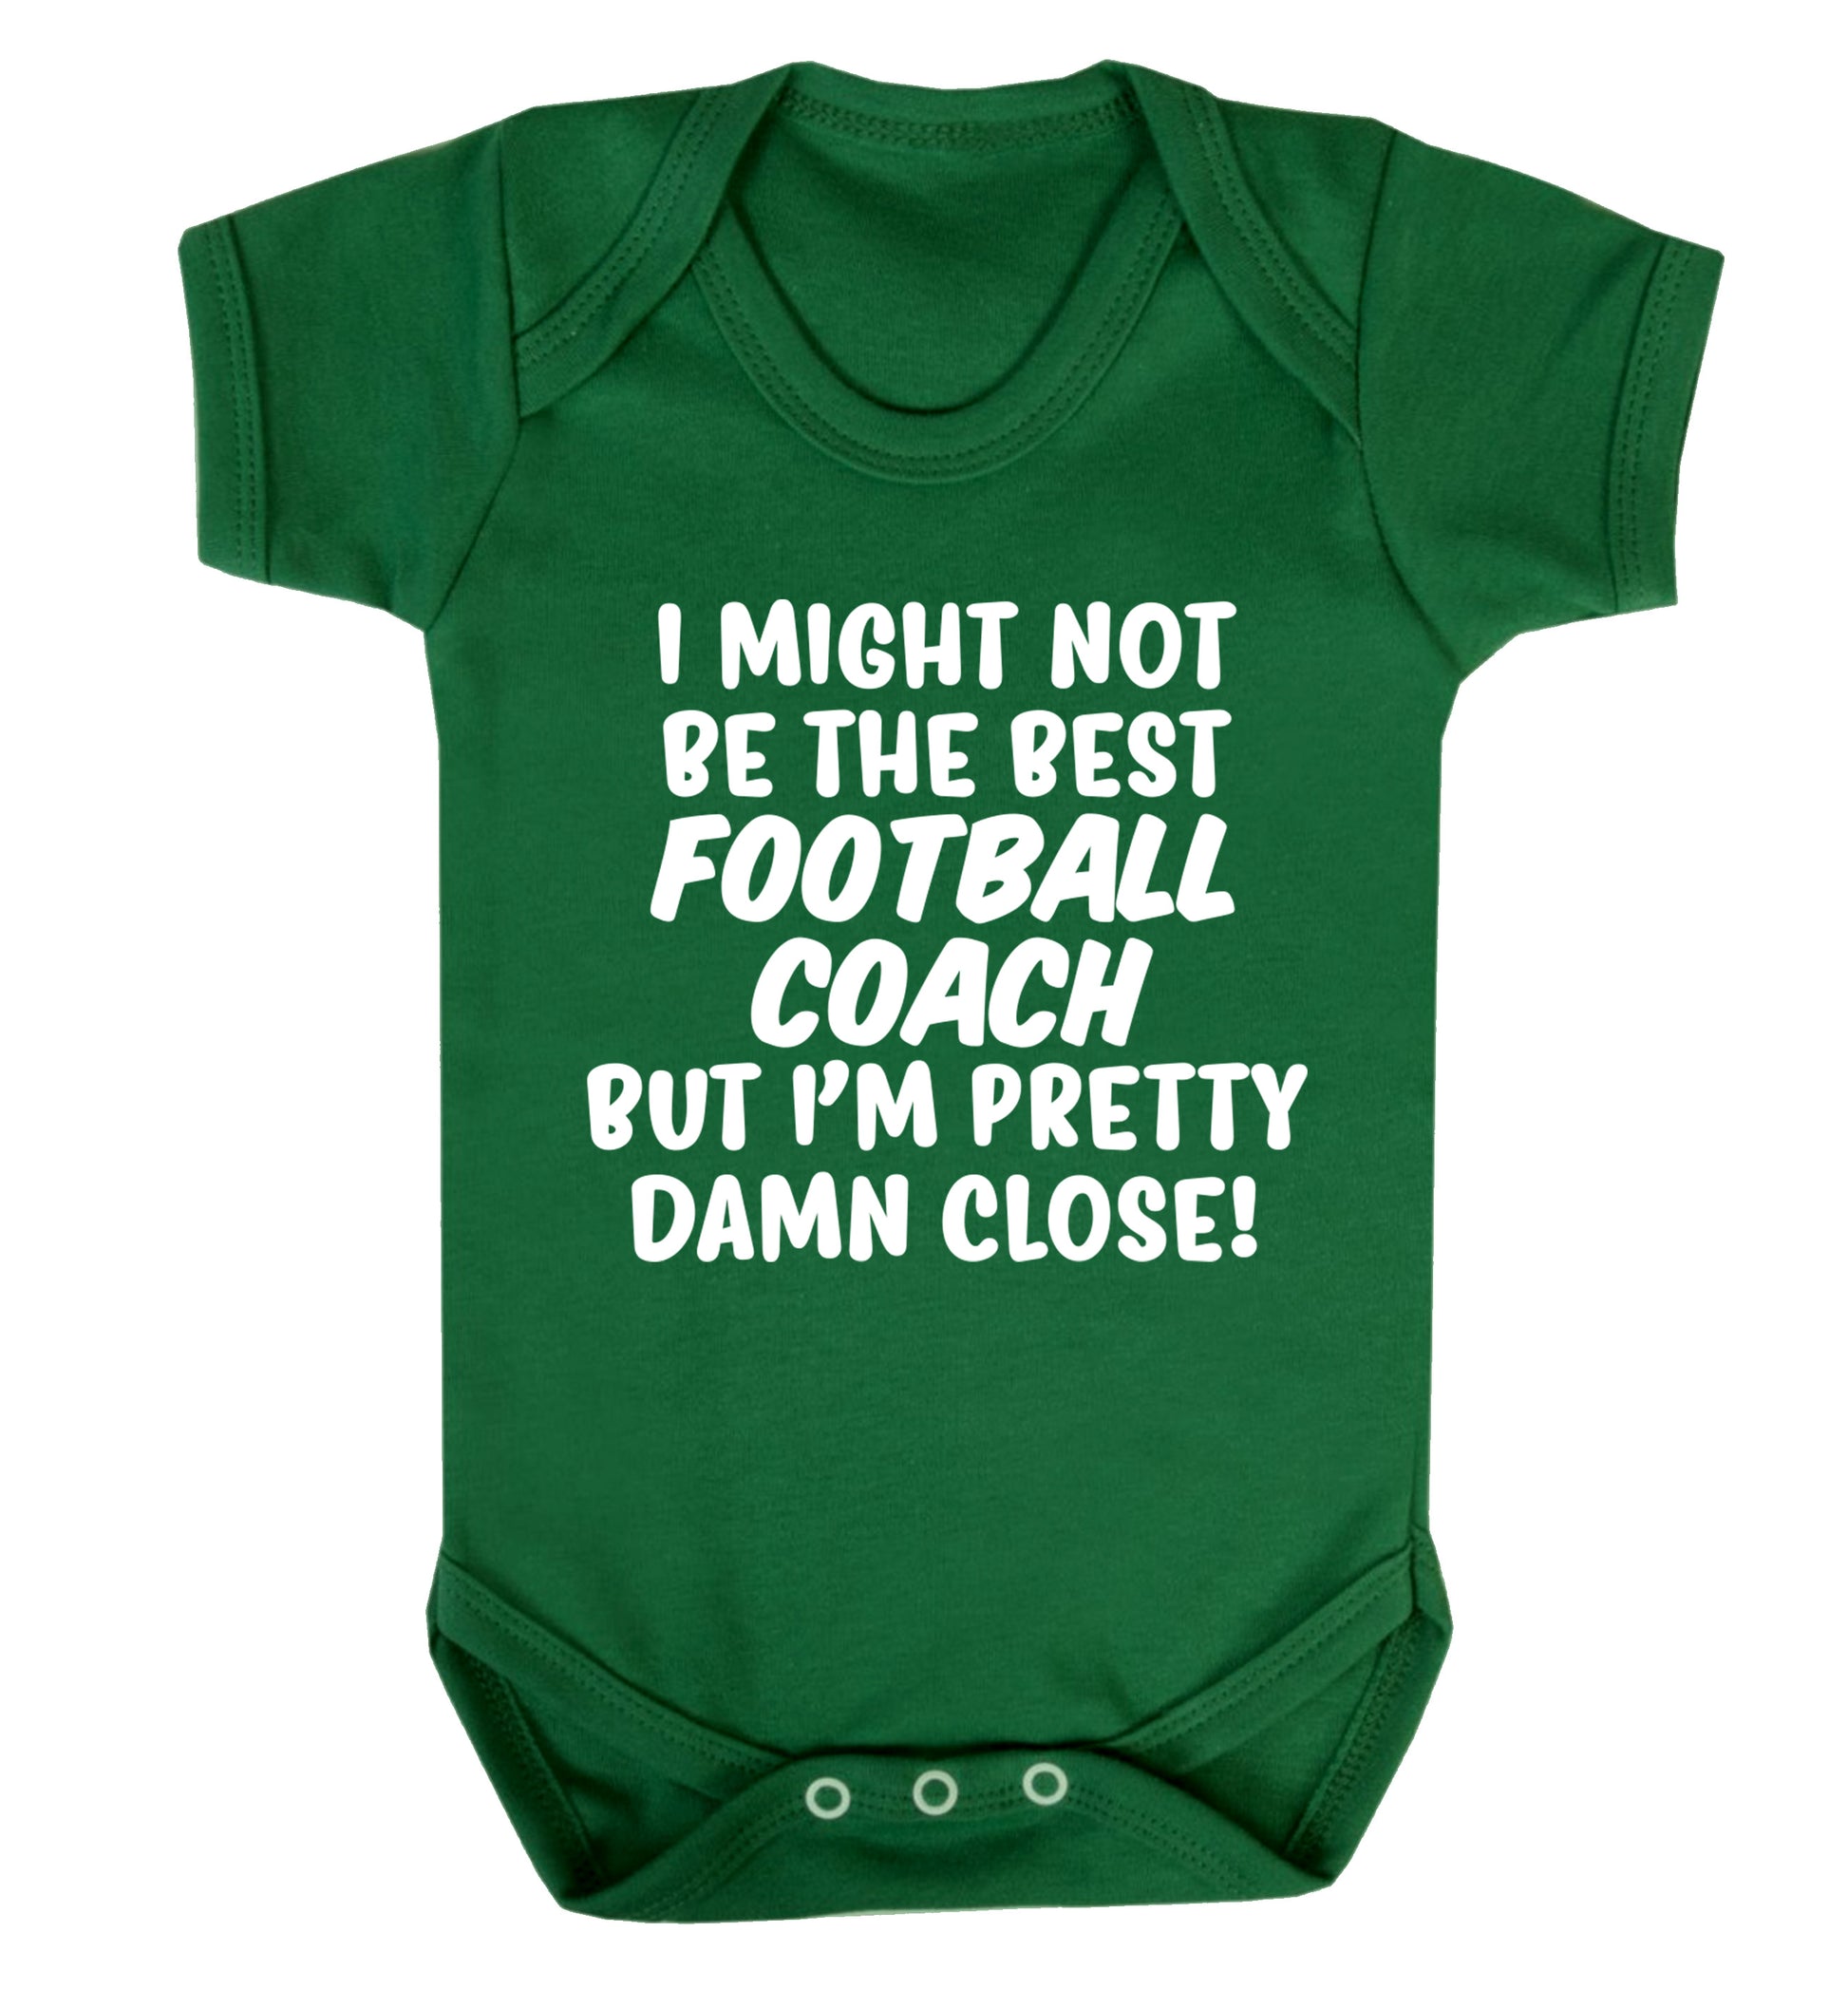 I might not be the best football coach but I'm pretty close! Baby Vest green 18-24 months